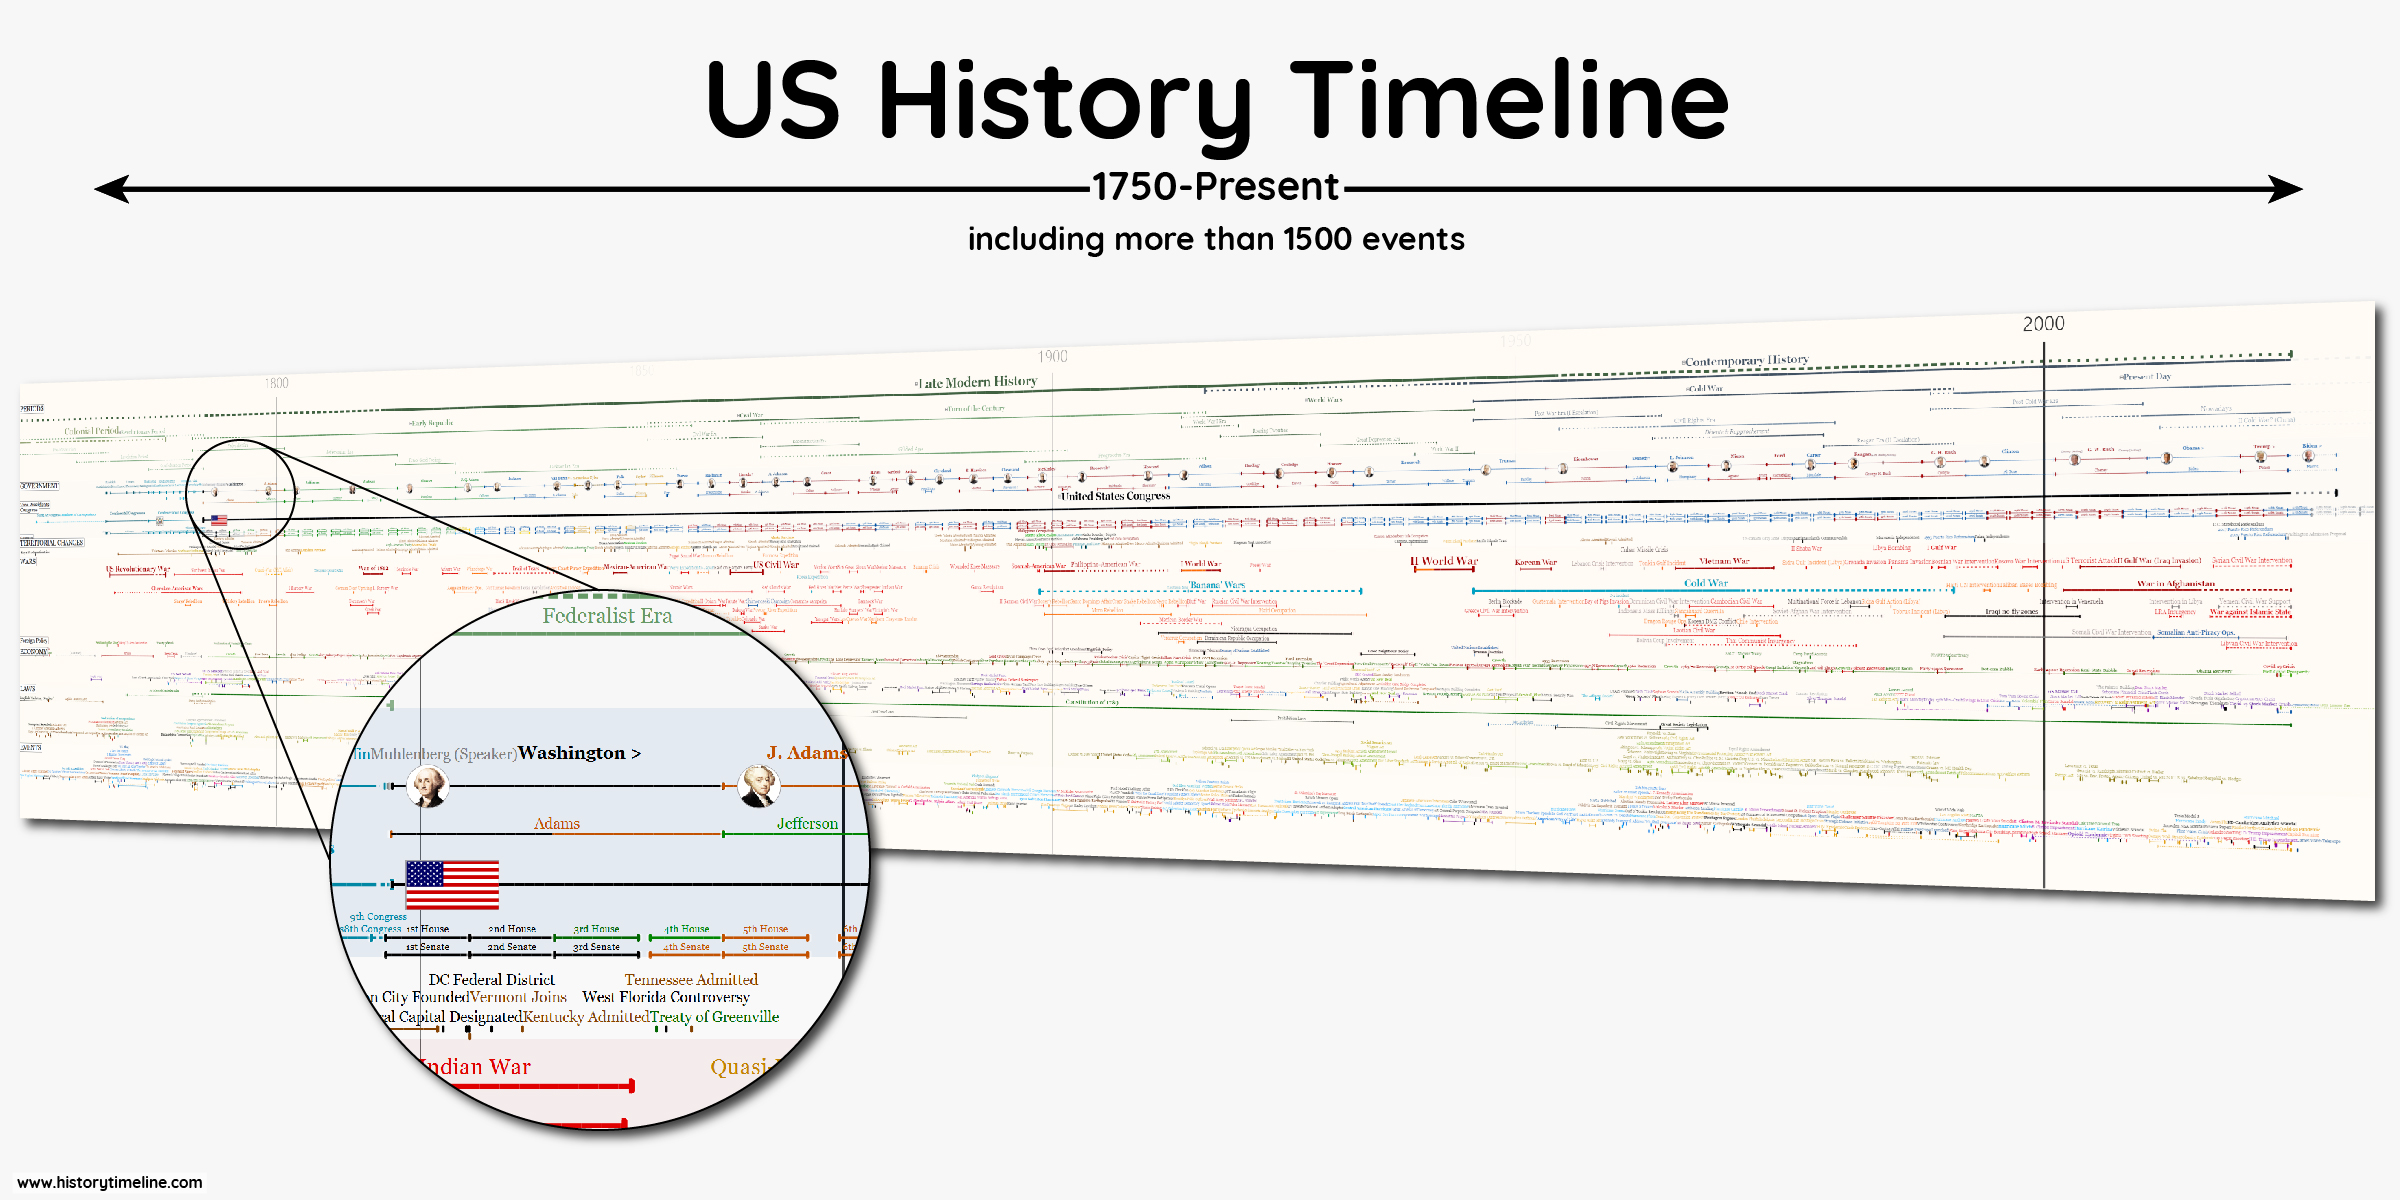 XXL Timeline of the United States (1750-Present) with more than 1500 items, including periods, presidents, wars, economy trends, laws and other historical events